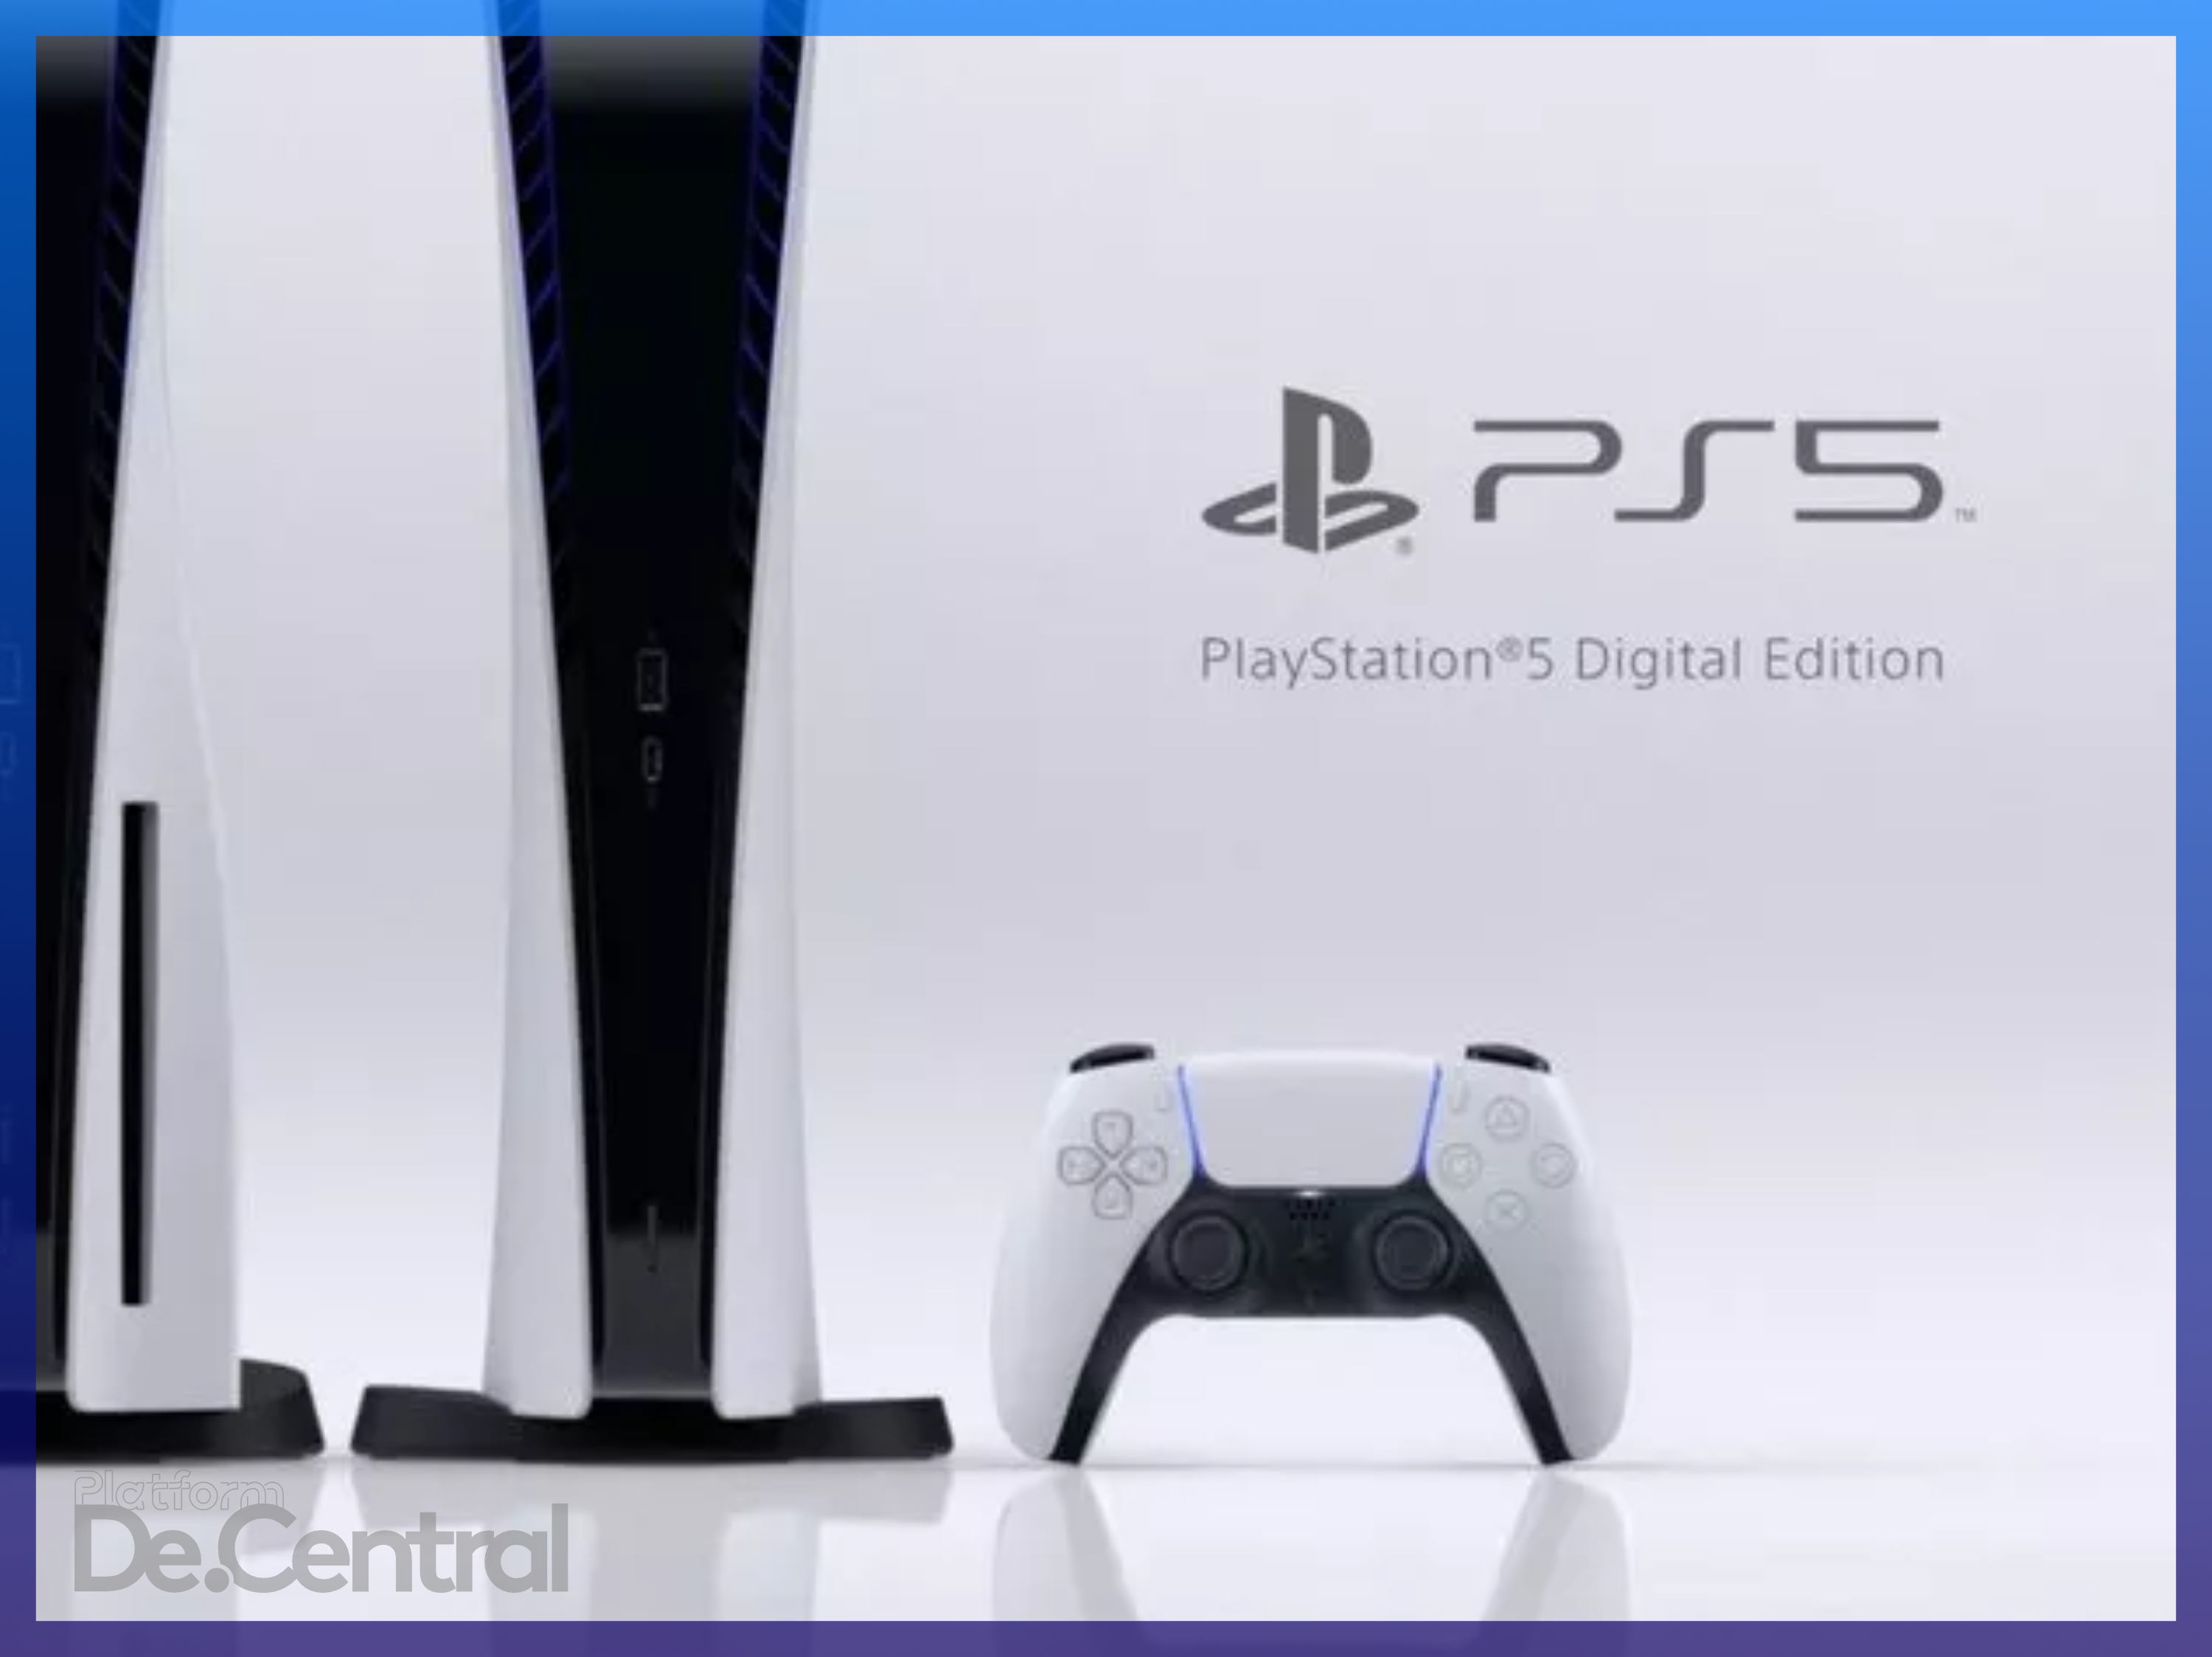 Sony will try to win on price with a cheaper PS5 Digital Edition